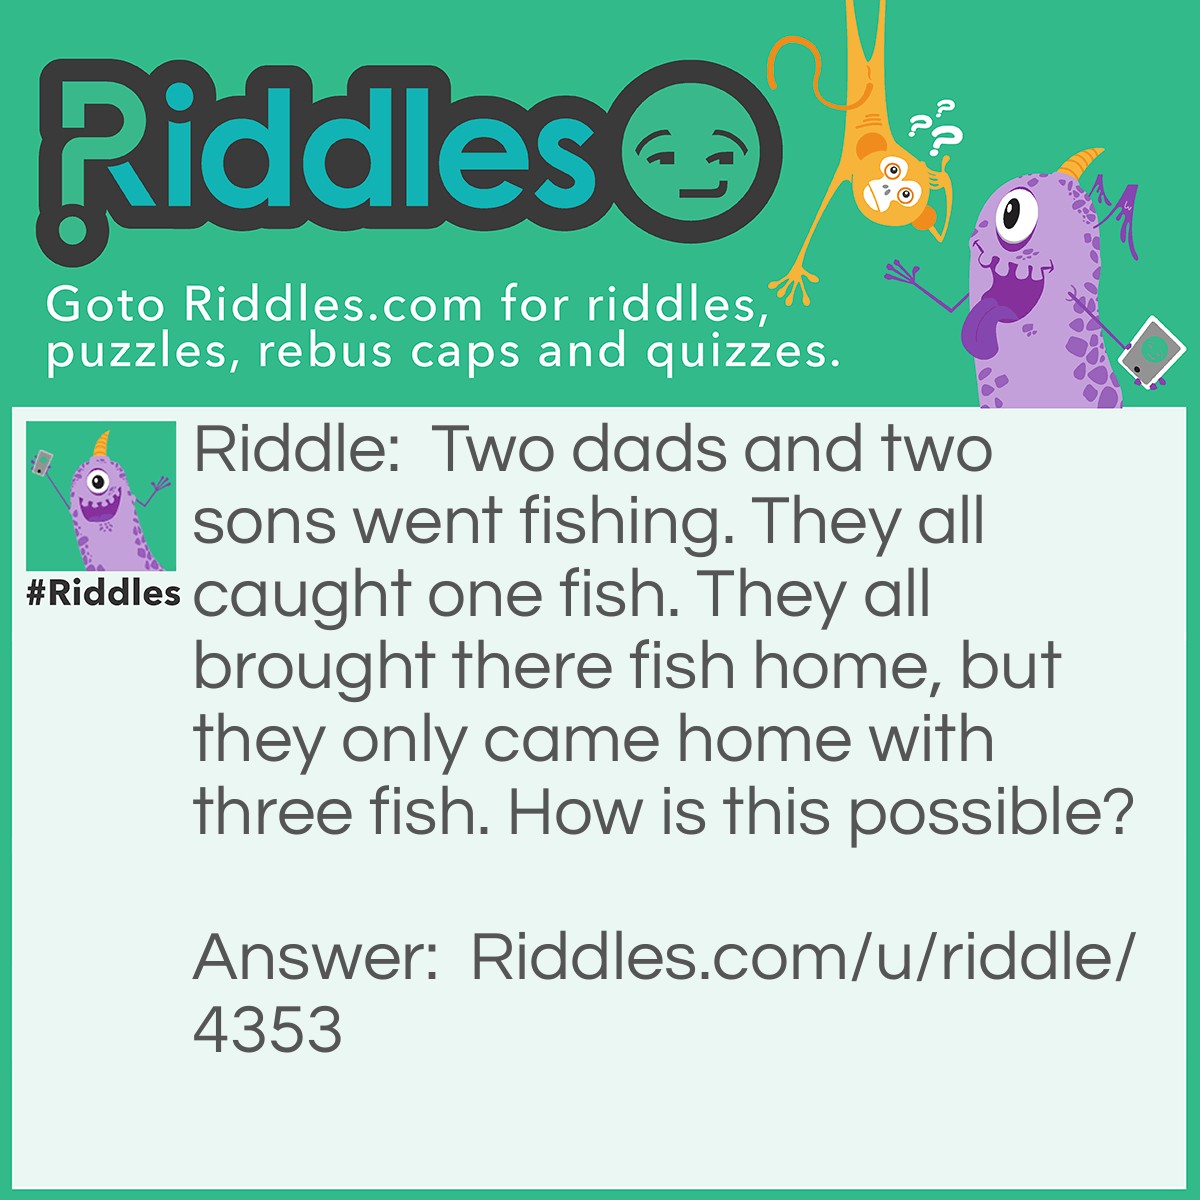 Riddle: Two dads and two sons went fishing. They all caught one fish. They all brought there fish home, but they only came home with three fish. How is this possible? Answer: There was a son, a father, and a grandfather. (The father was the sons dad, and the grandfather was the fathers dad. The son was the fathers son, and the father was the grandfathers son.)